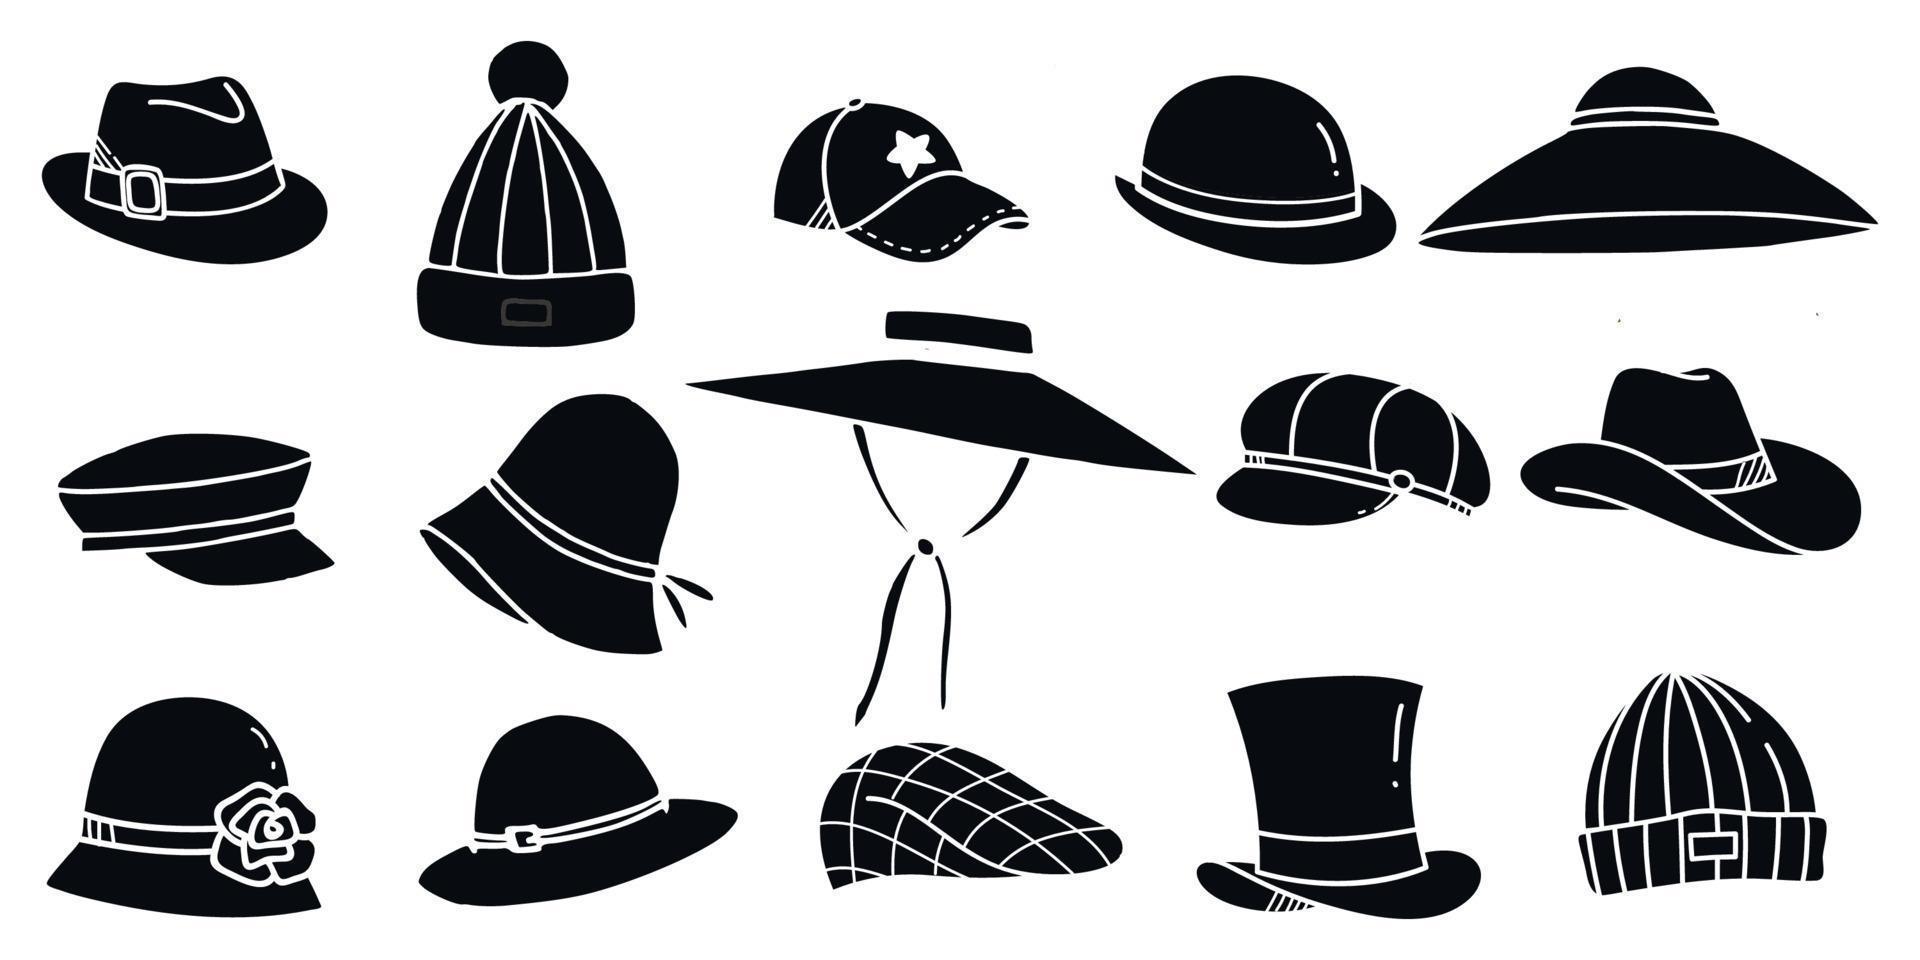 Big set of hat vector icons. Simple illustration set of 9 hat elements, editable icons, can be used in logo, UI and web design